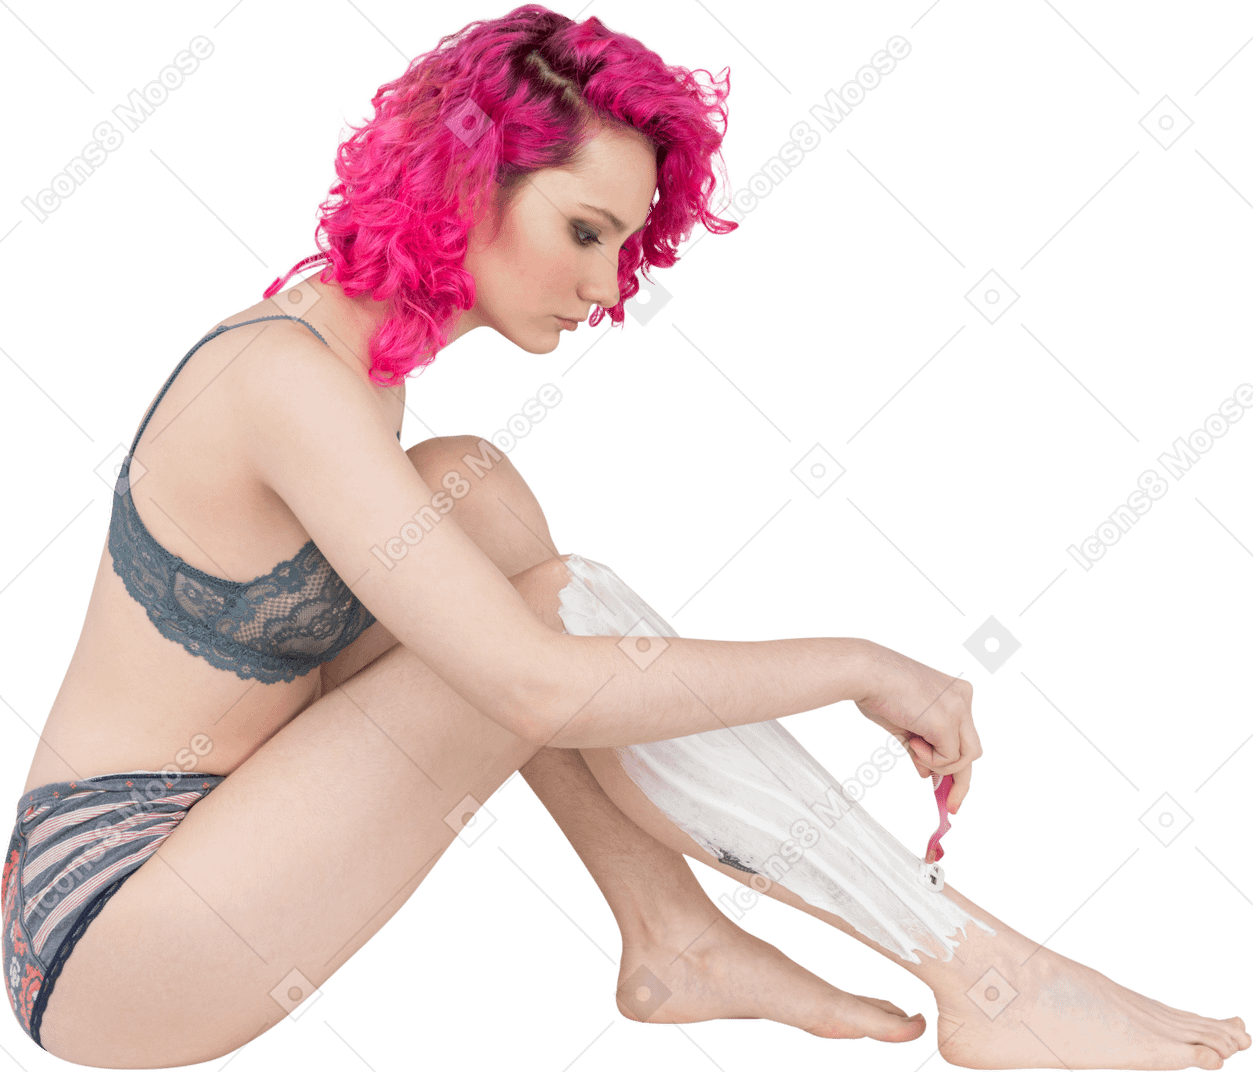 Young woman with curly pink hair shaving legs